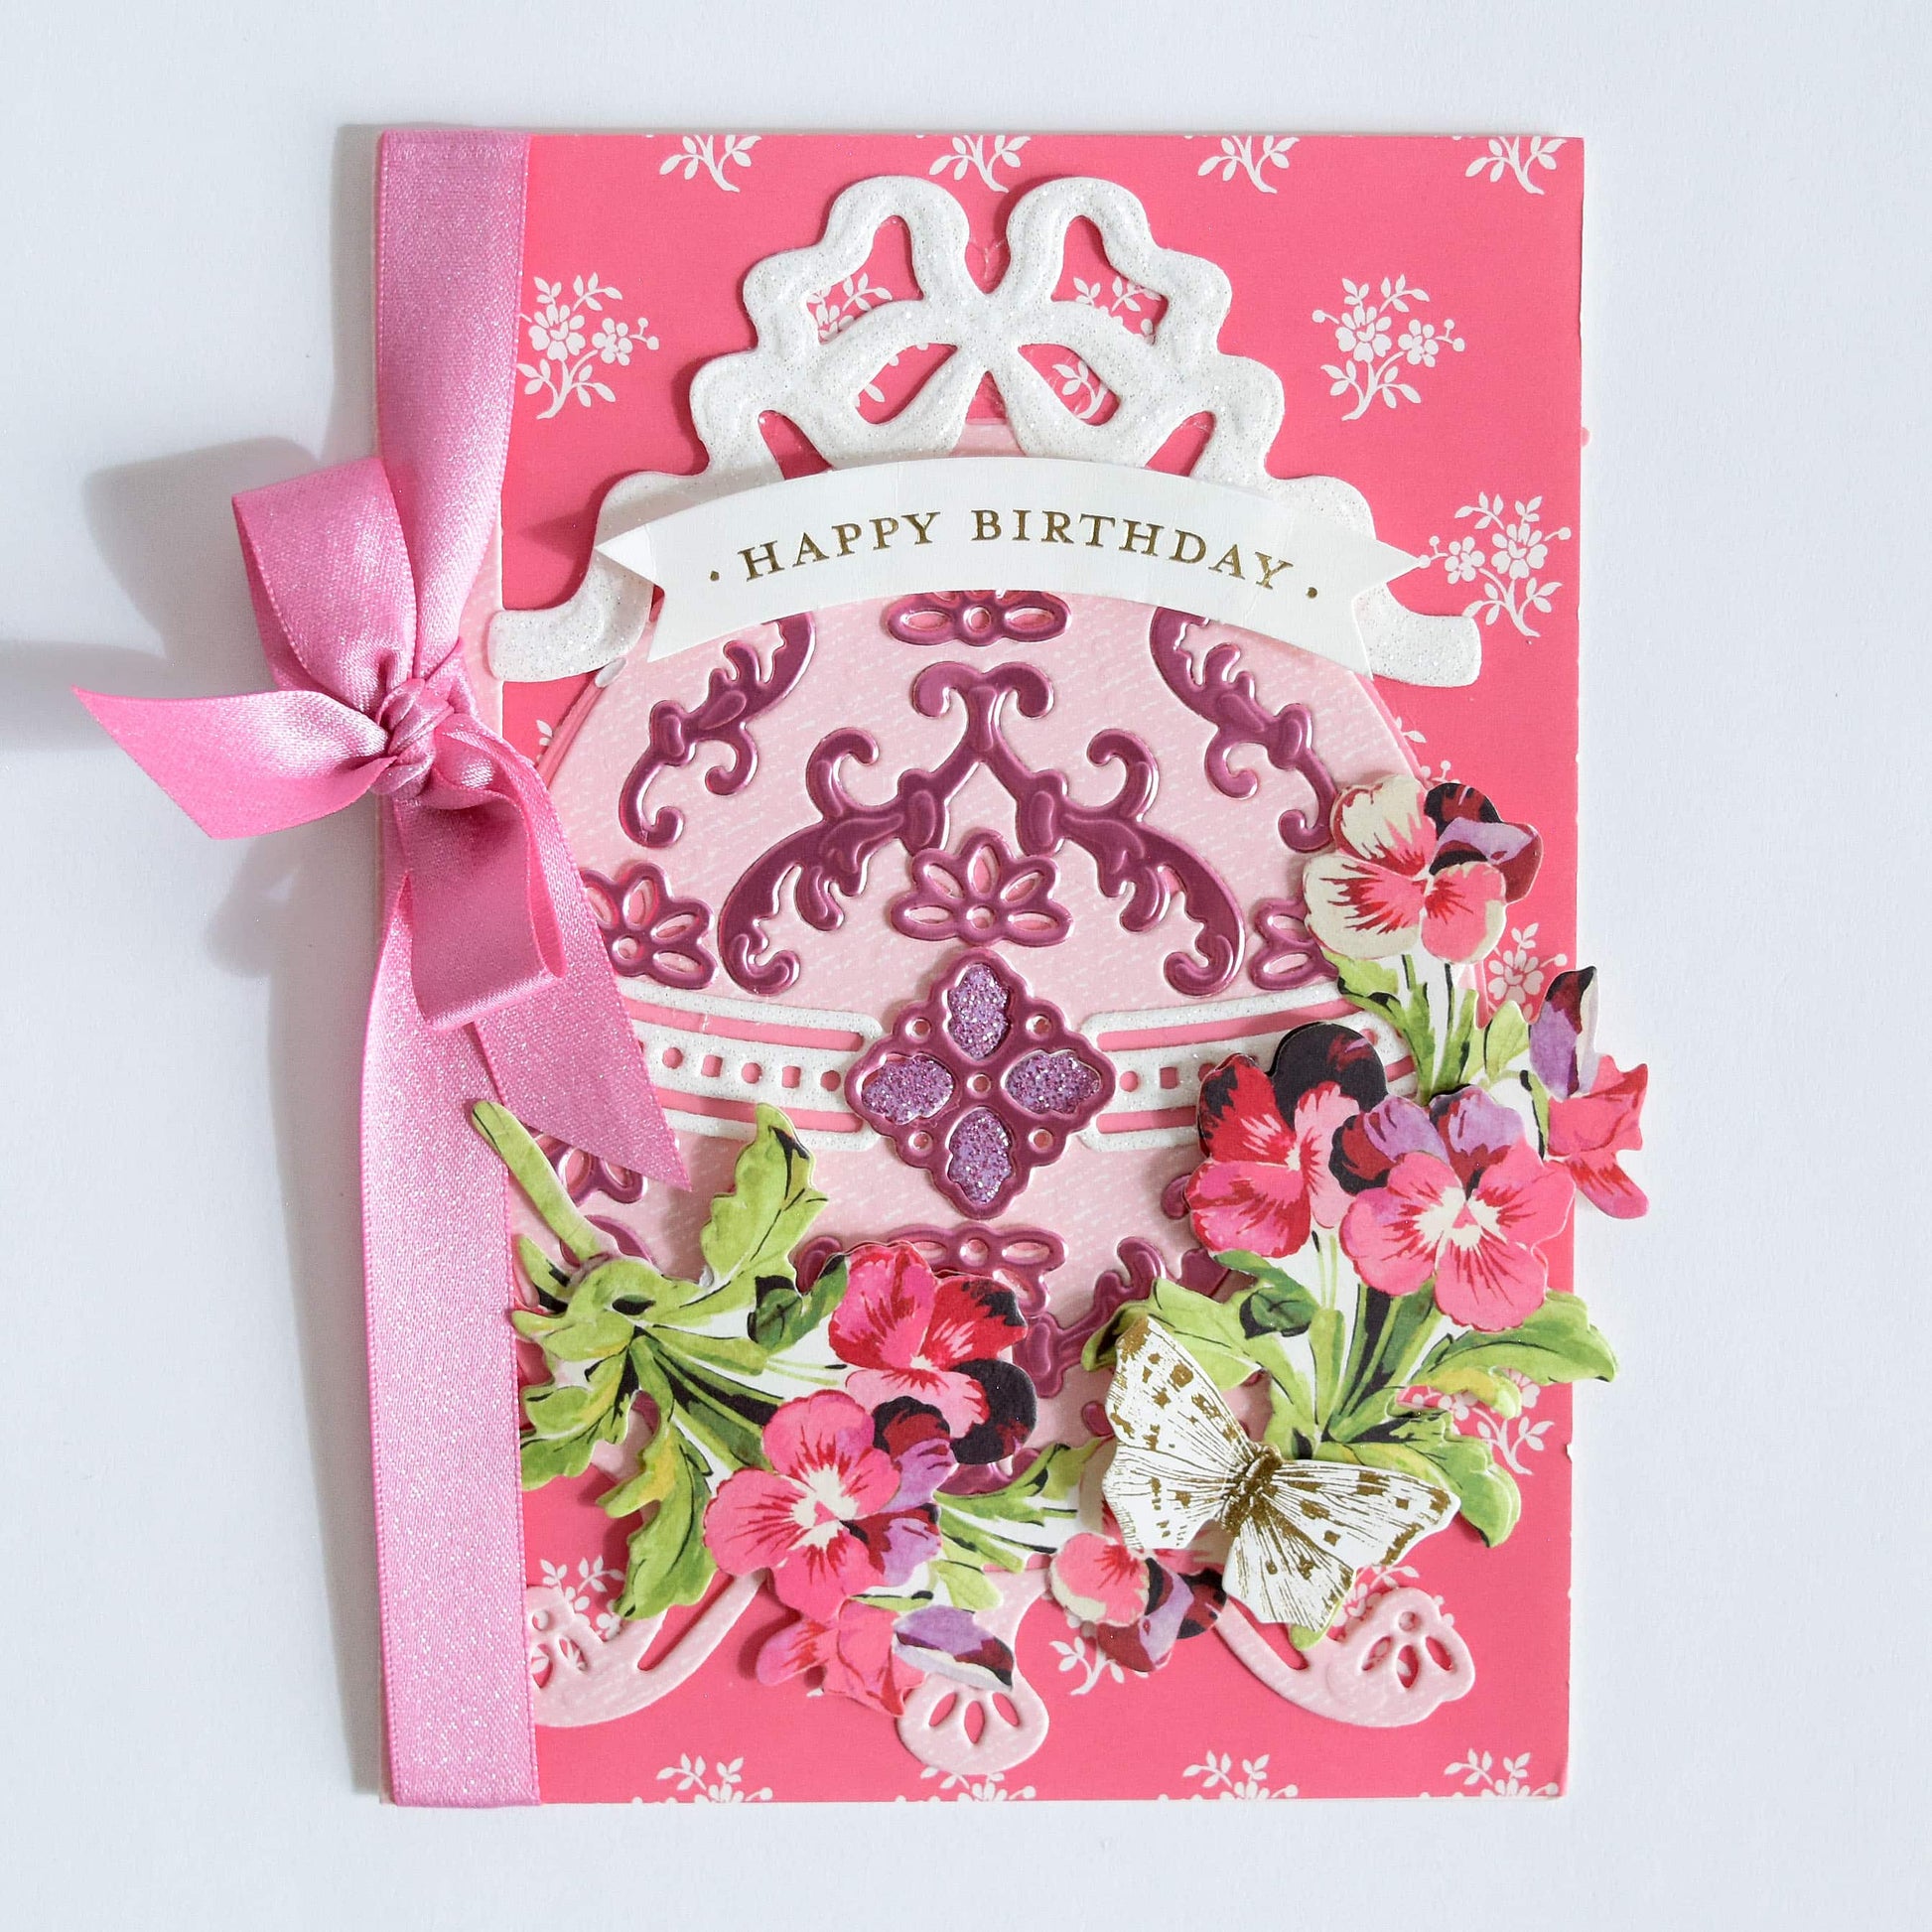 a pink birthday card with a tiara on it.